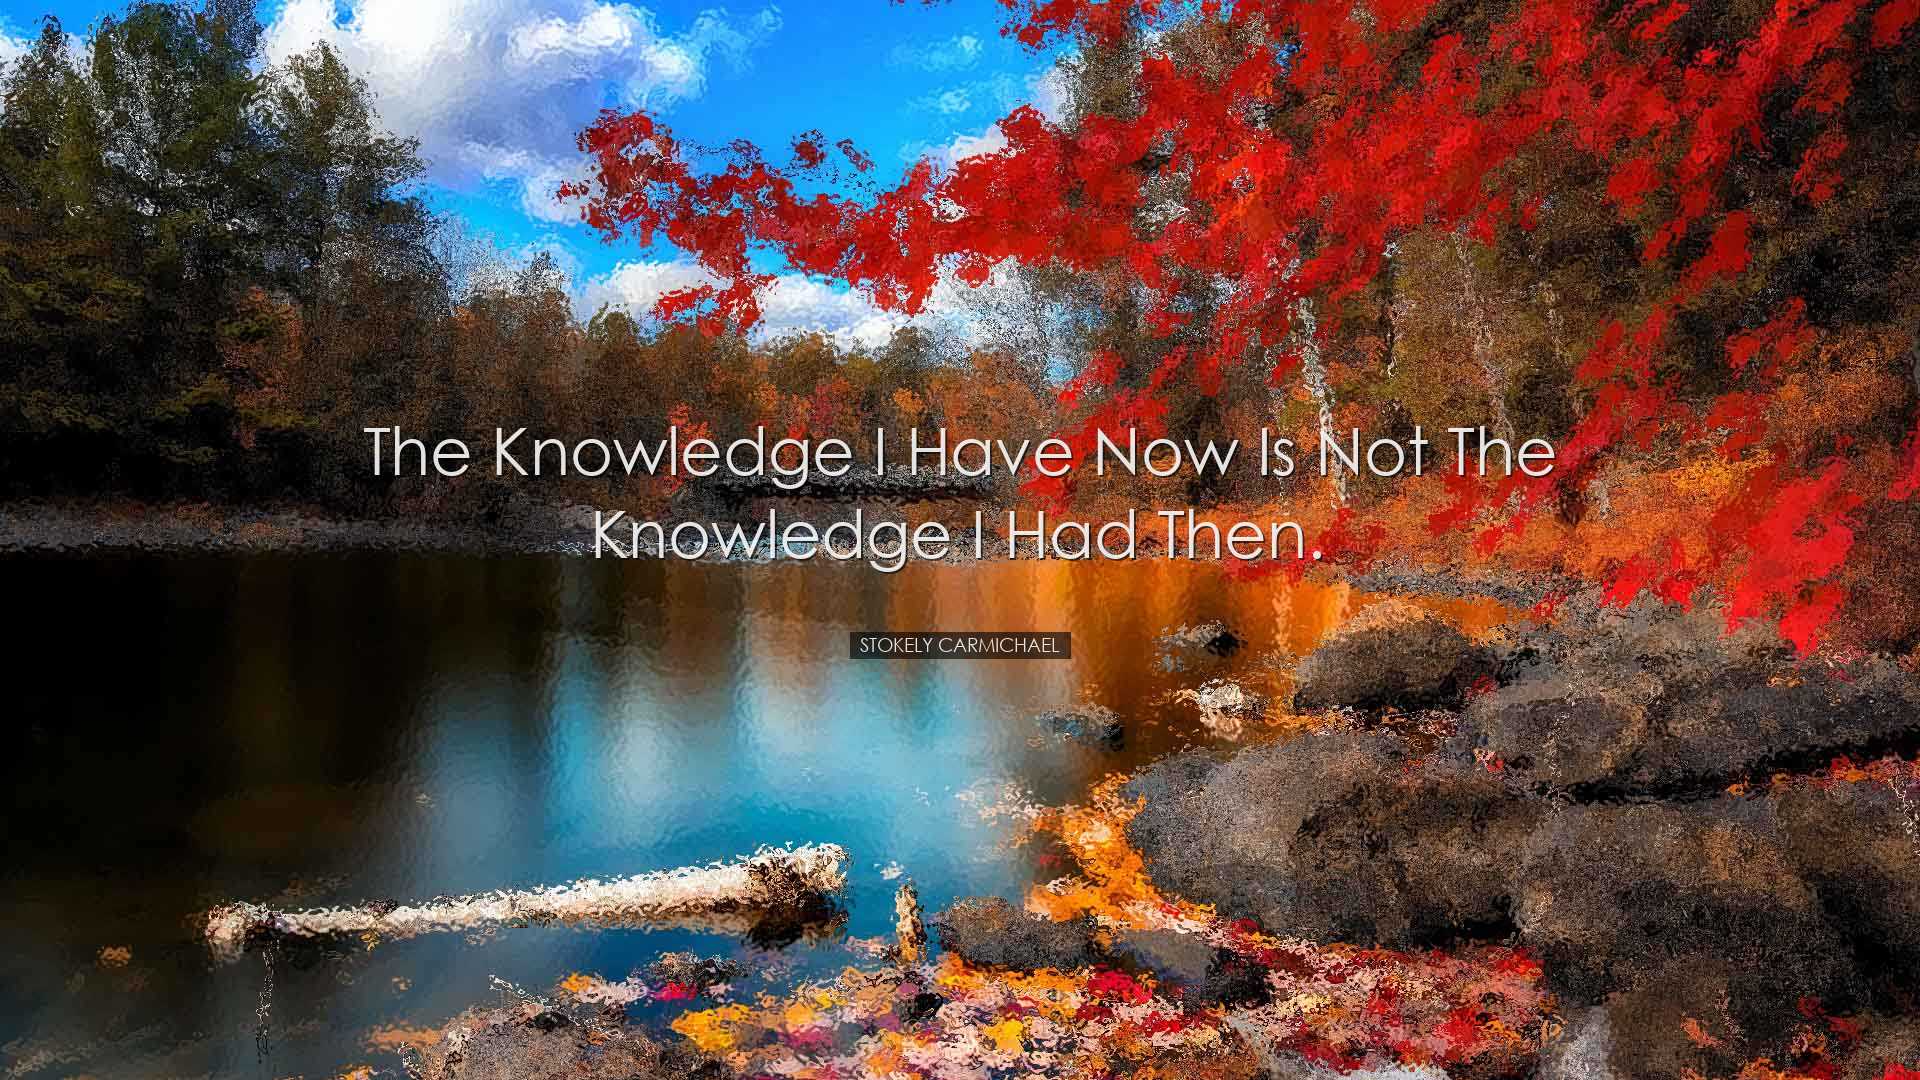 The knowledge I have now is not the knowledge I had then. - Stokel